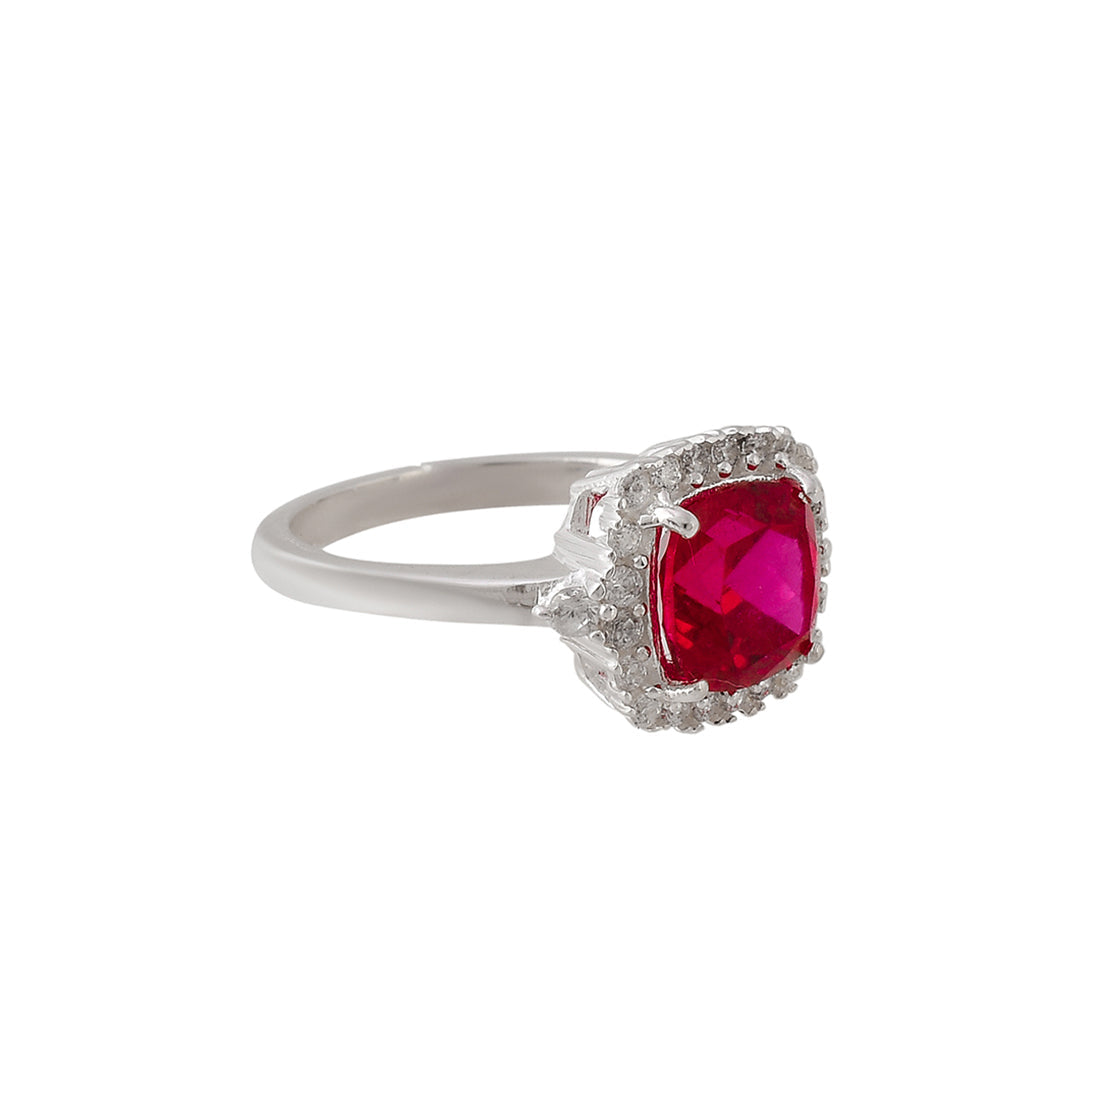 Women's 925 Sterling Silver Square Cut Red Ruby Embellished Ring - Voylla